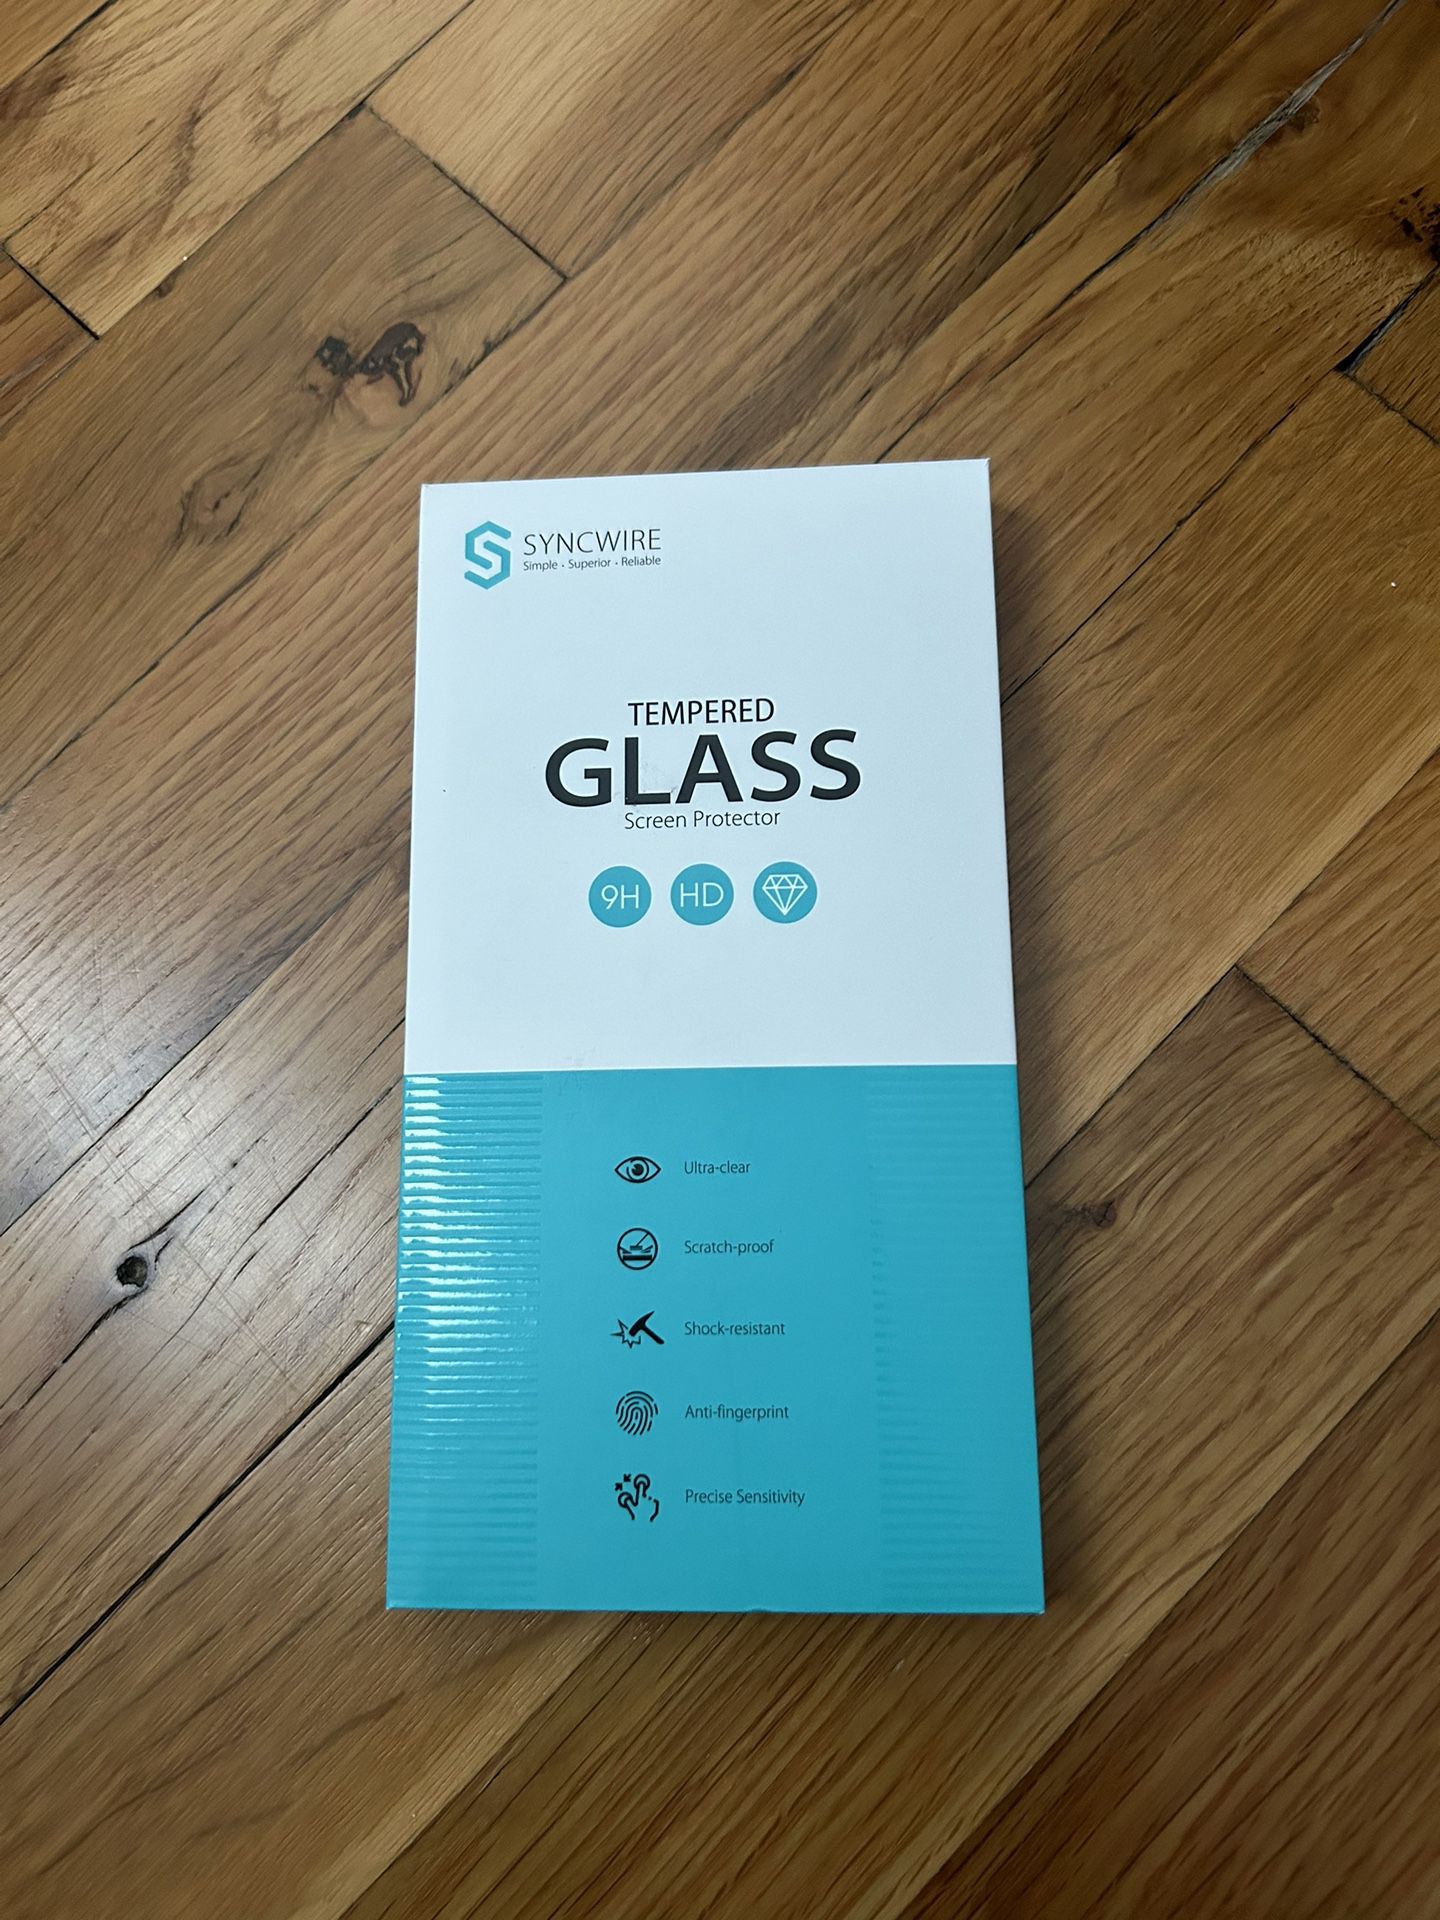 Screen Protector For iPhone Xr And 11